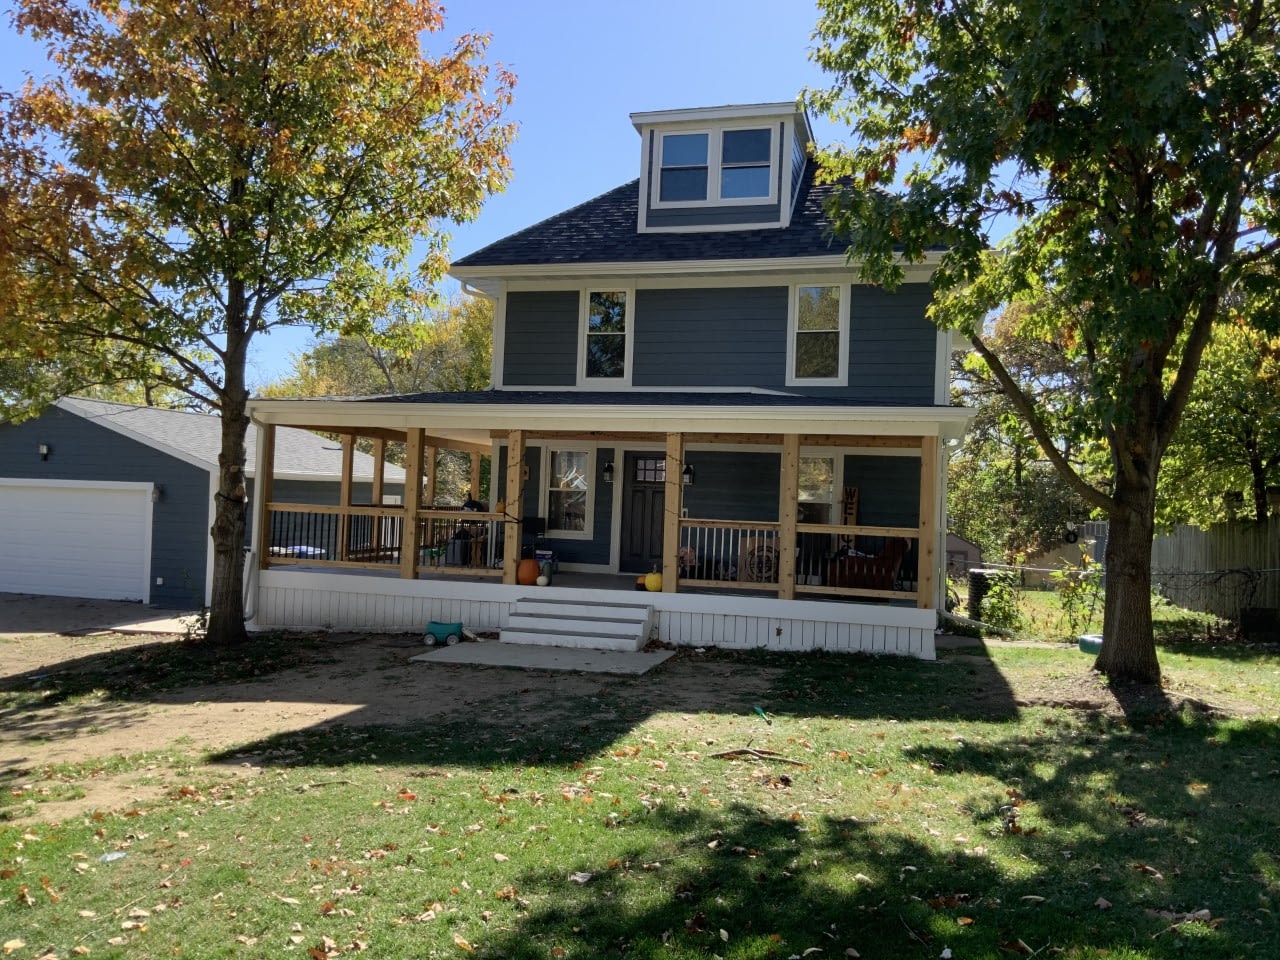 Total makeover on Southside Des Moines Iowa home